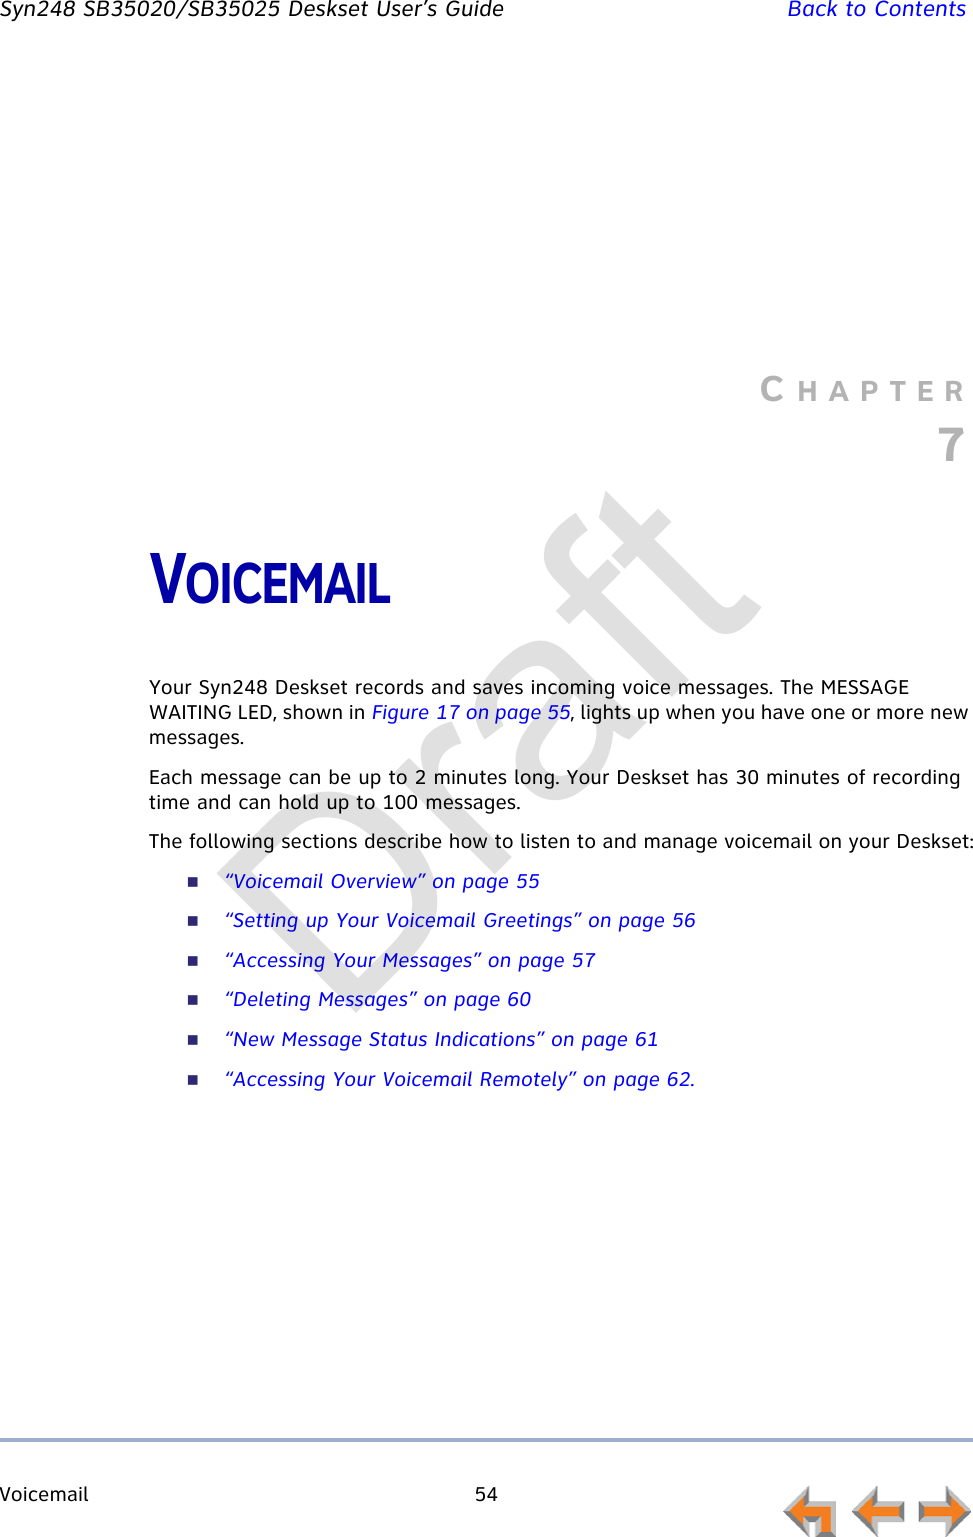 Voicemail 54         Syn248 SB35020/SB35025 Deskset User’s Guide Back to ContentsCHAPTER7VOICEMAILYour Syn248 Deskset records and saves incoming voice messages. The MESSAGE WAITING LED, shown in Figure 17 on page 55, lights up when you have one or more new messages.Each message can be up to 2 minutes long. Your Deskset has 30 minutes of recording time and can hold up to 100 messages.The following sections describe how to listen to and manage voicemail on your Deskset:“Voicemail Overview” on page 55“Setting up Your Voicemail Greetings” on page 56“Accessing Your Messages” on page 57“Deleting Messages” on page 60“New Message Status Indications” on page 61“Accessing Your Voicemail Remotely” on page 62.Draft